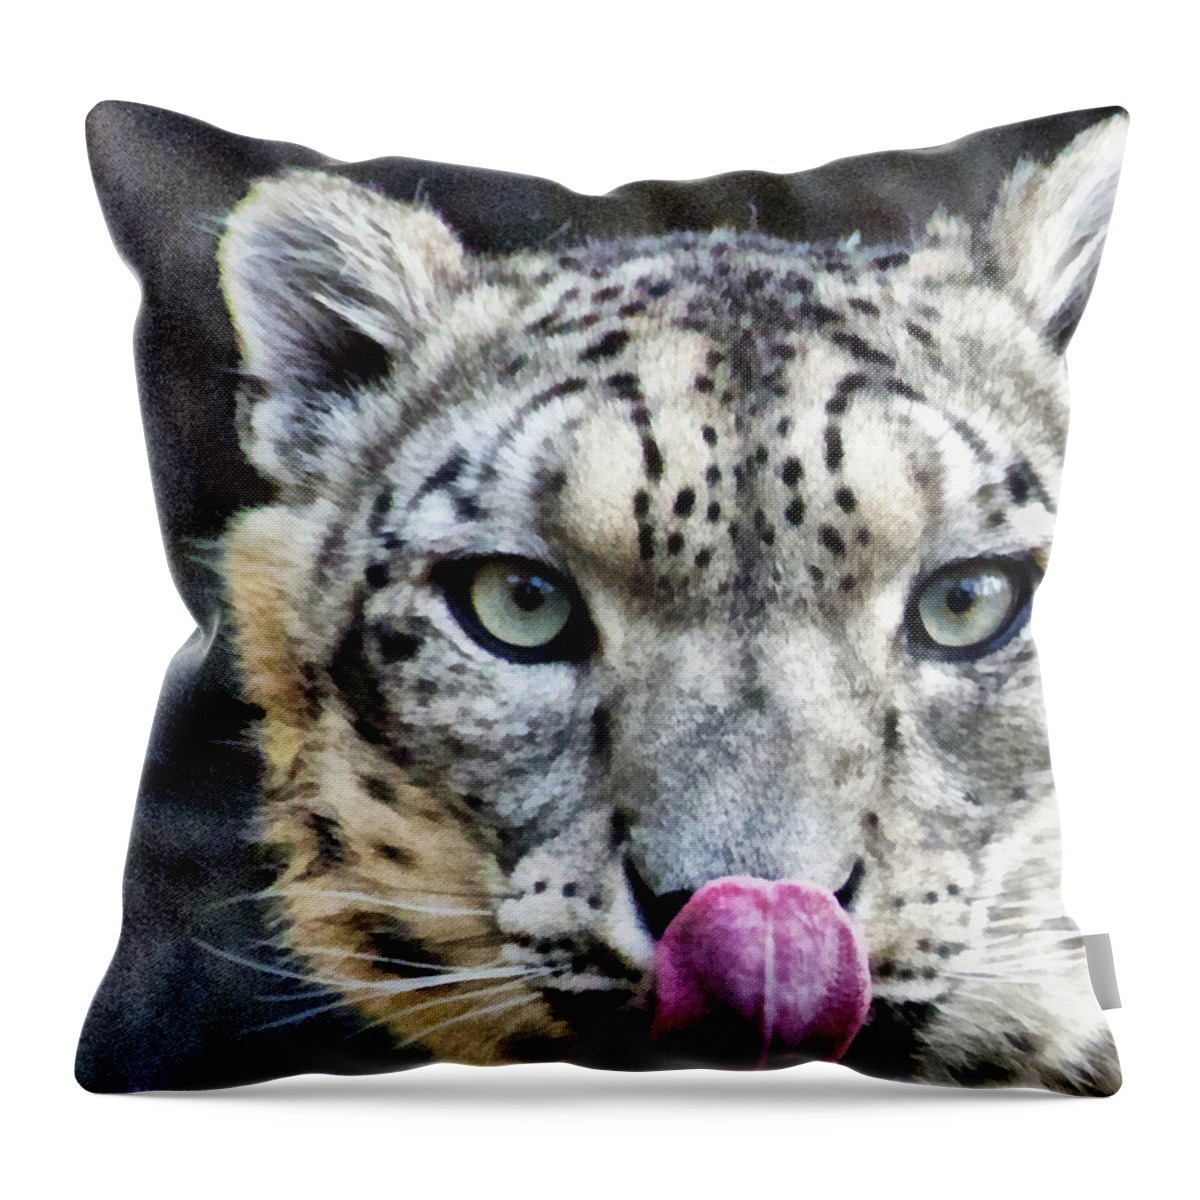 Eyes Throw Pillow featuring the mixed media Cat Lick Portrait by Angelina Tamez